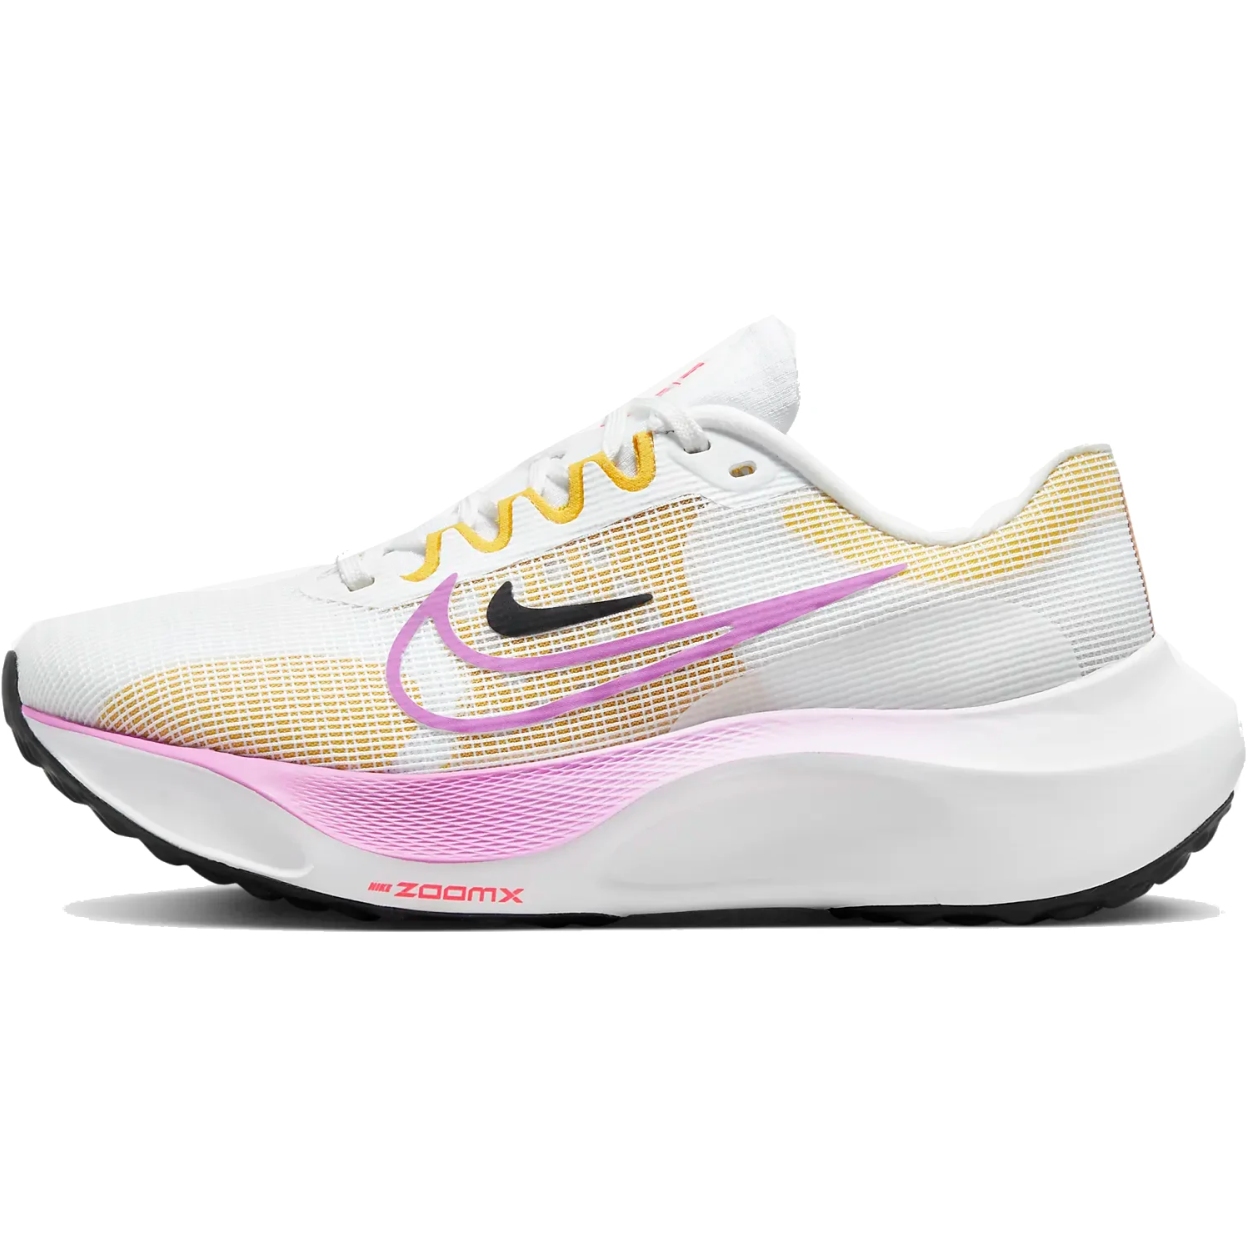 Picture of Nike Zoom Fly 5 Road Running Shoes Women - white DM8974-100